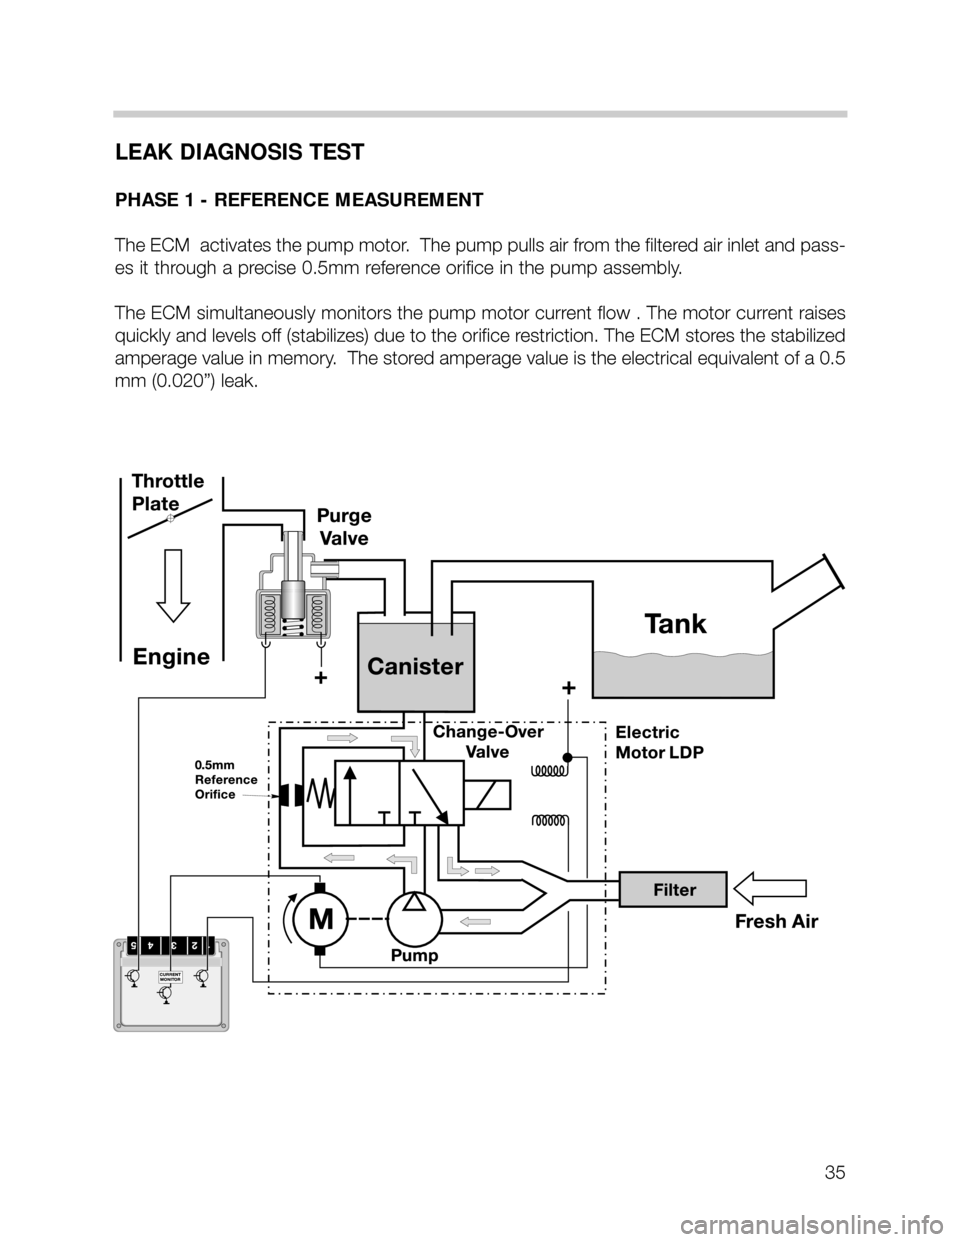 BMW 735i 2000 E38 M62TU Engine Workshop Manual LEAK DIAGNOSIS TEST
PHASE 1 - REFERENCE MEASUREMENT
The ECM  activates the pump motor.  The pump pulls air from the filtered air inlet and pass-
es it through a precise 0.5mm reference orifice in the 